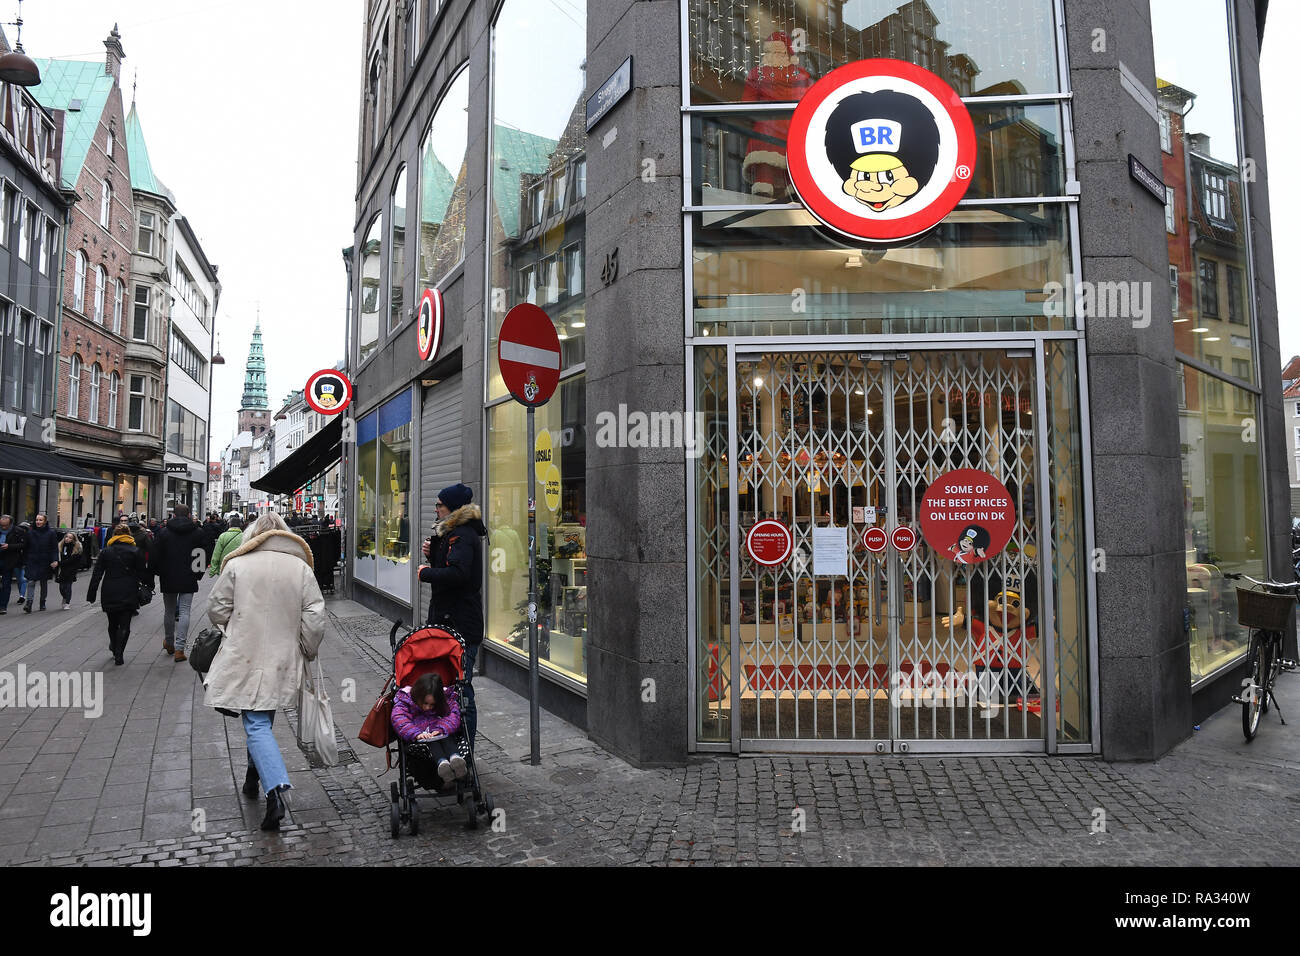 Copenhagen, Denmark. 31st Dec, 2018. Top Toy declared bankruptcy on 28th  December 2018. BR toy store, which is owned by Top Toy, has closed today  31st Dec, 2018. Credit: Francis Joseph Dean /